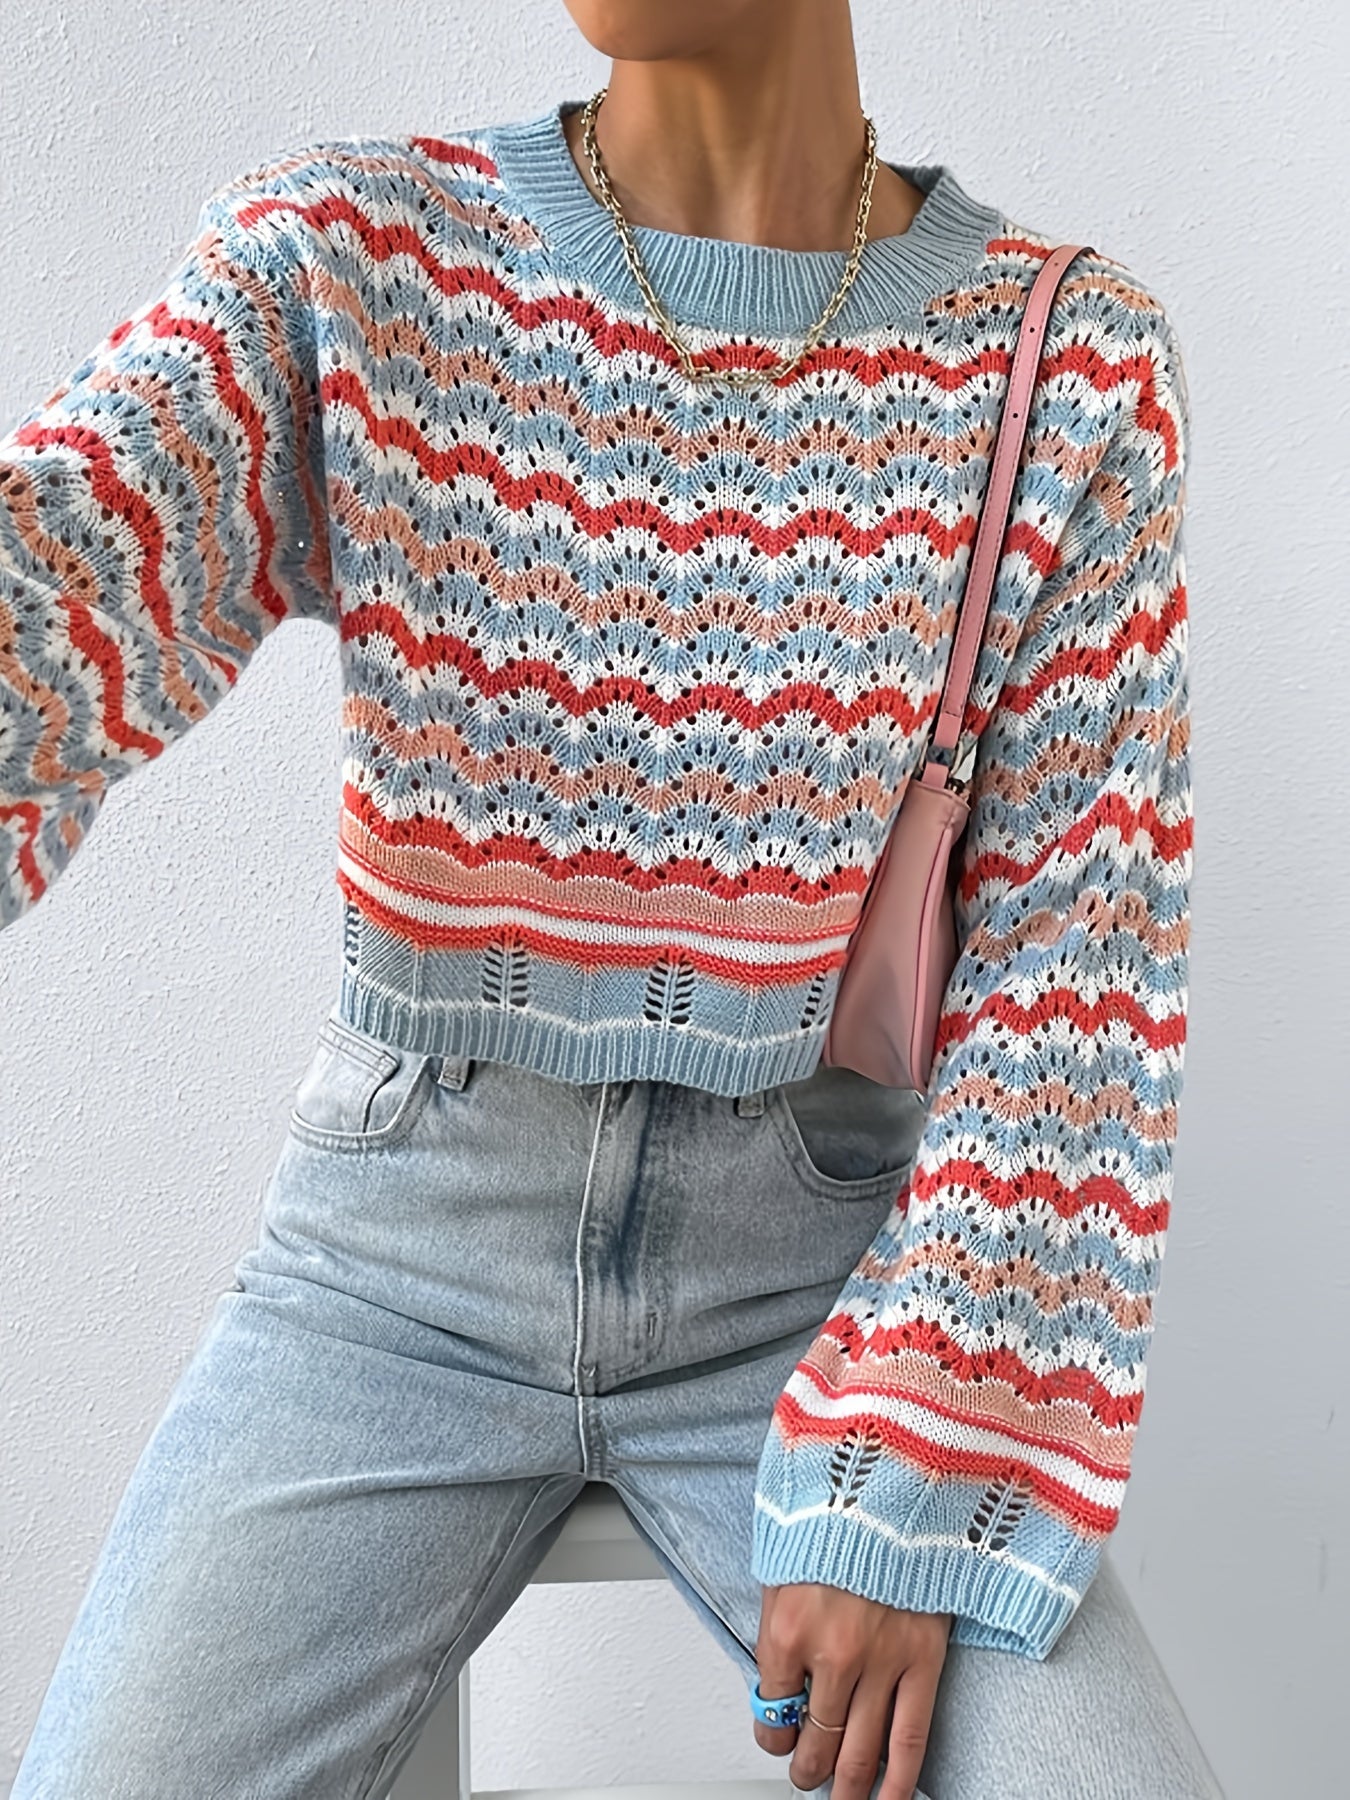 Antmvs Colorful Printing Knit Sweater, Casual Crew Neck Long Sleeve Sweater, Women's Clothing